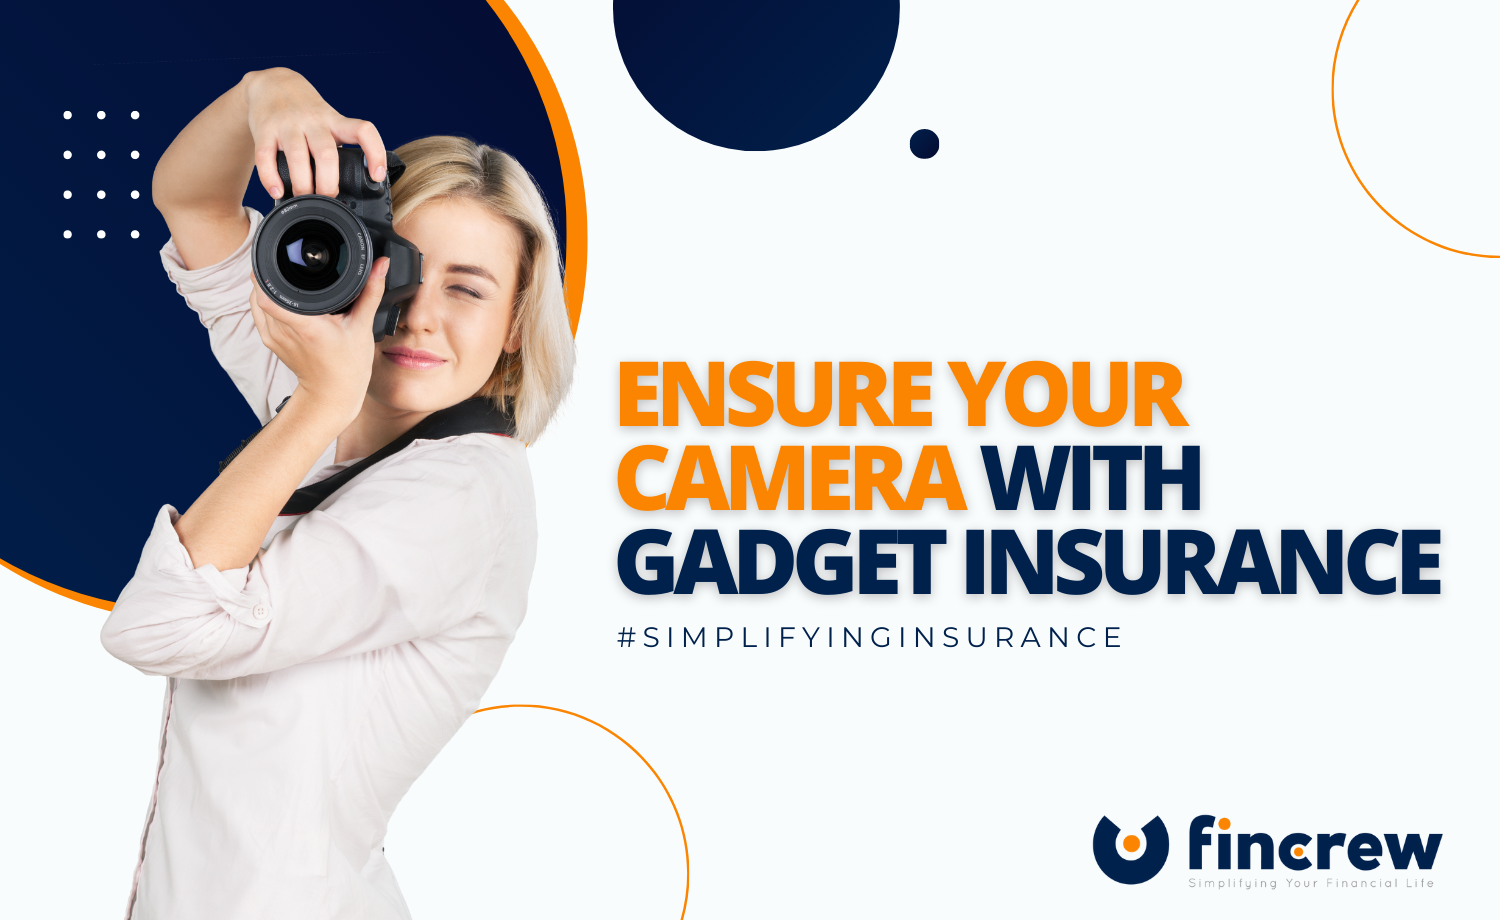 Ensure Your Camera With Gadget Insurance Blog Featured Image